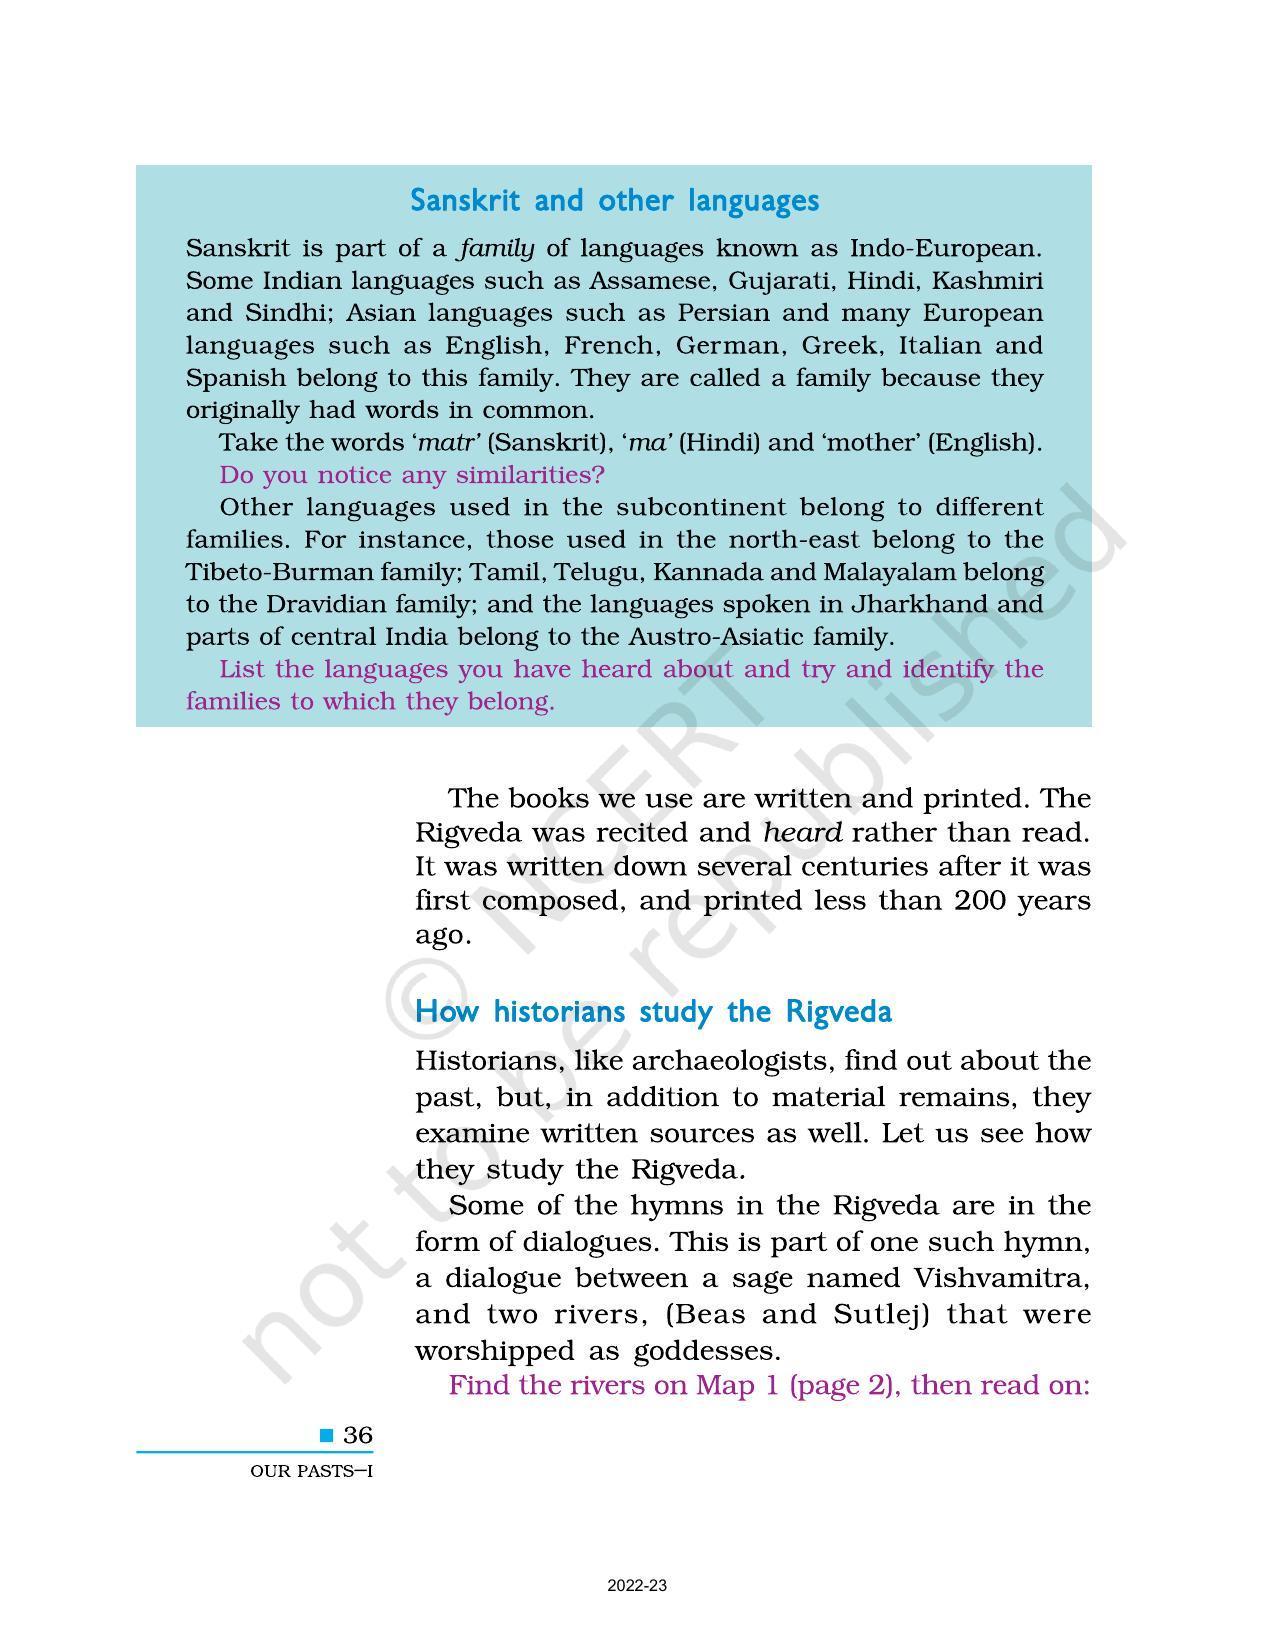 NCERT Book for Class 6 Social Science(History) : Chapter 4-What Books and Burials Tell Us - Page 2